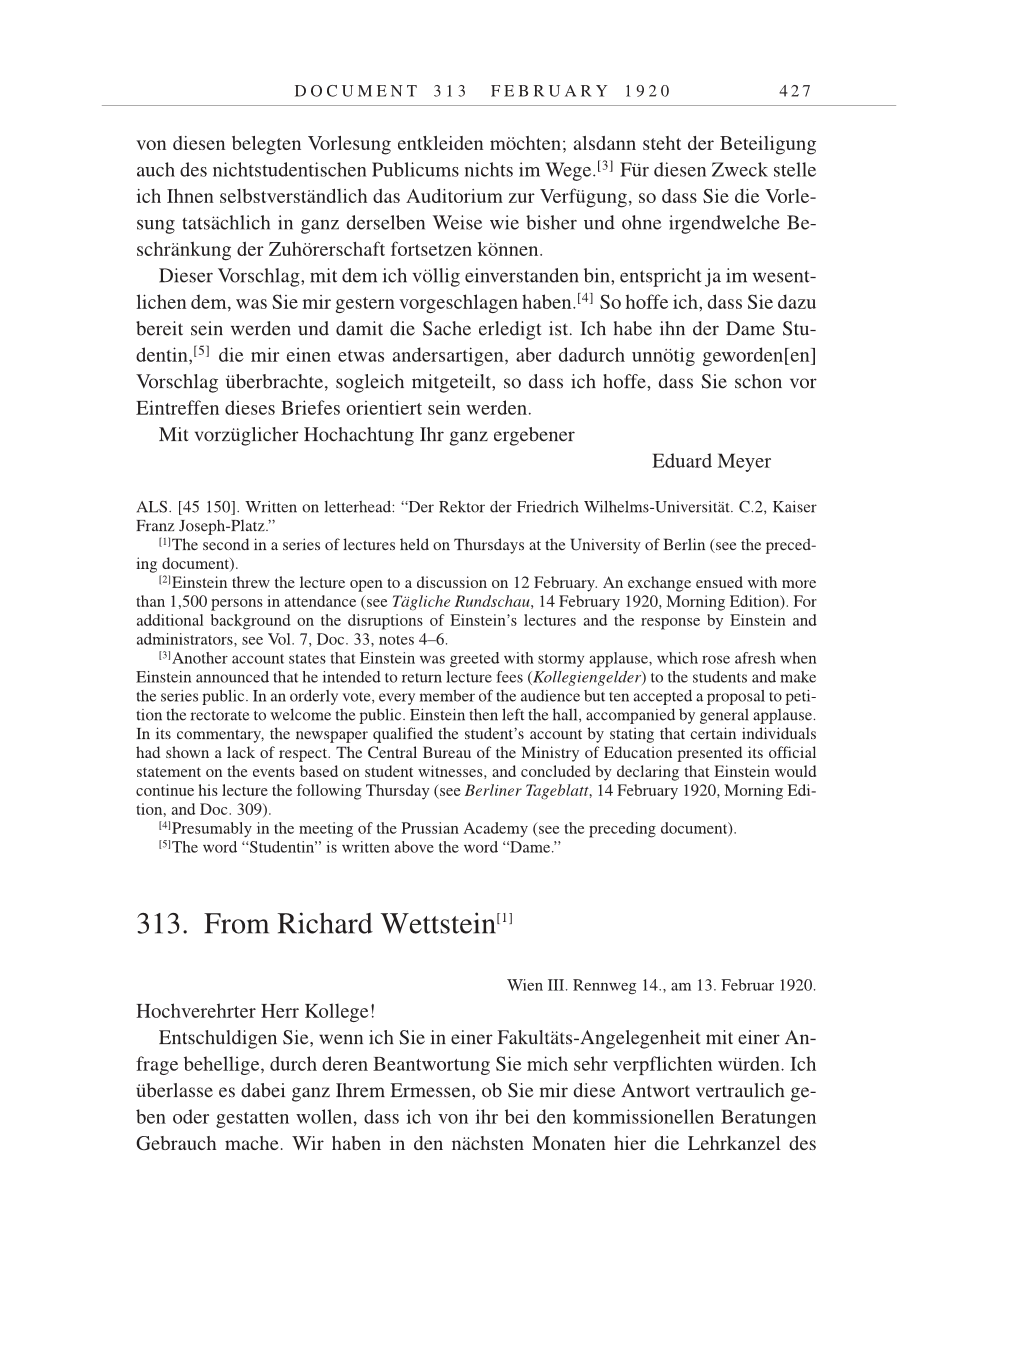 Volume 9: The Berlin Years: Correspondence January 1919-April 1920 page 427